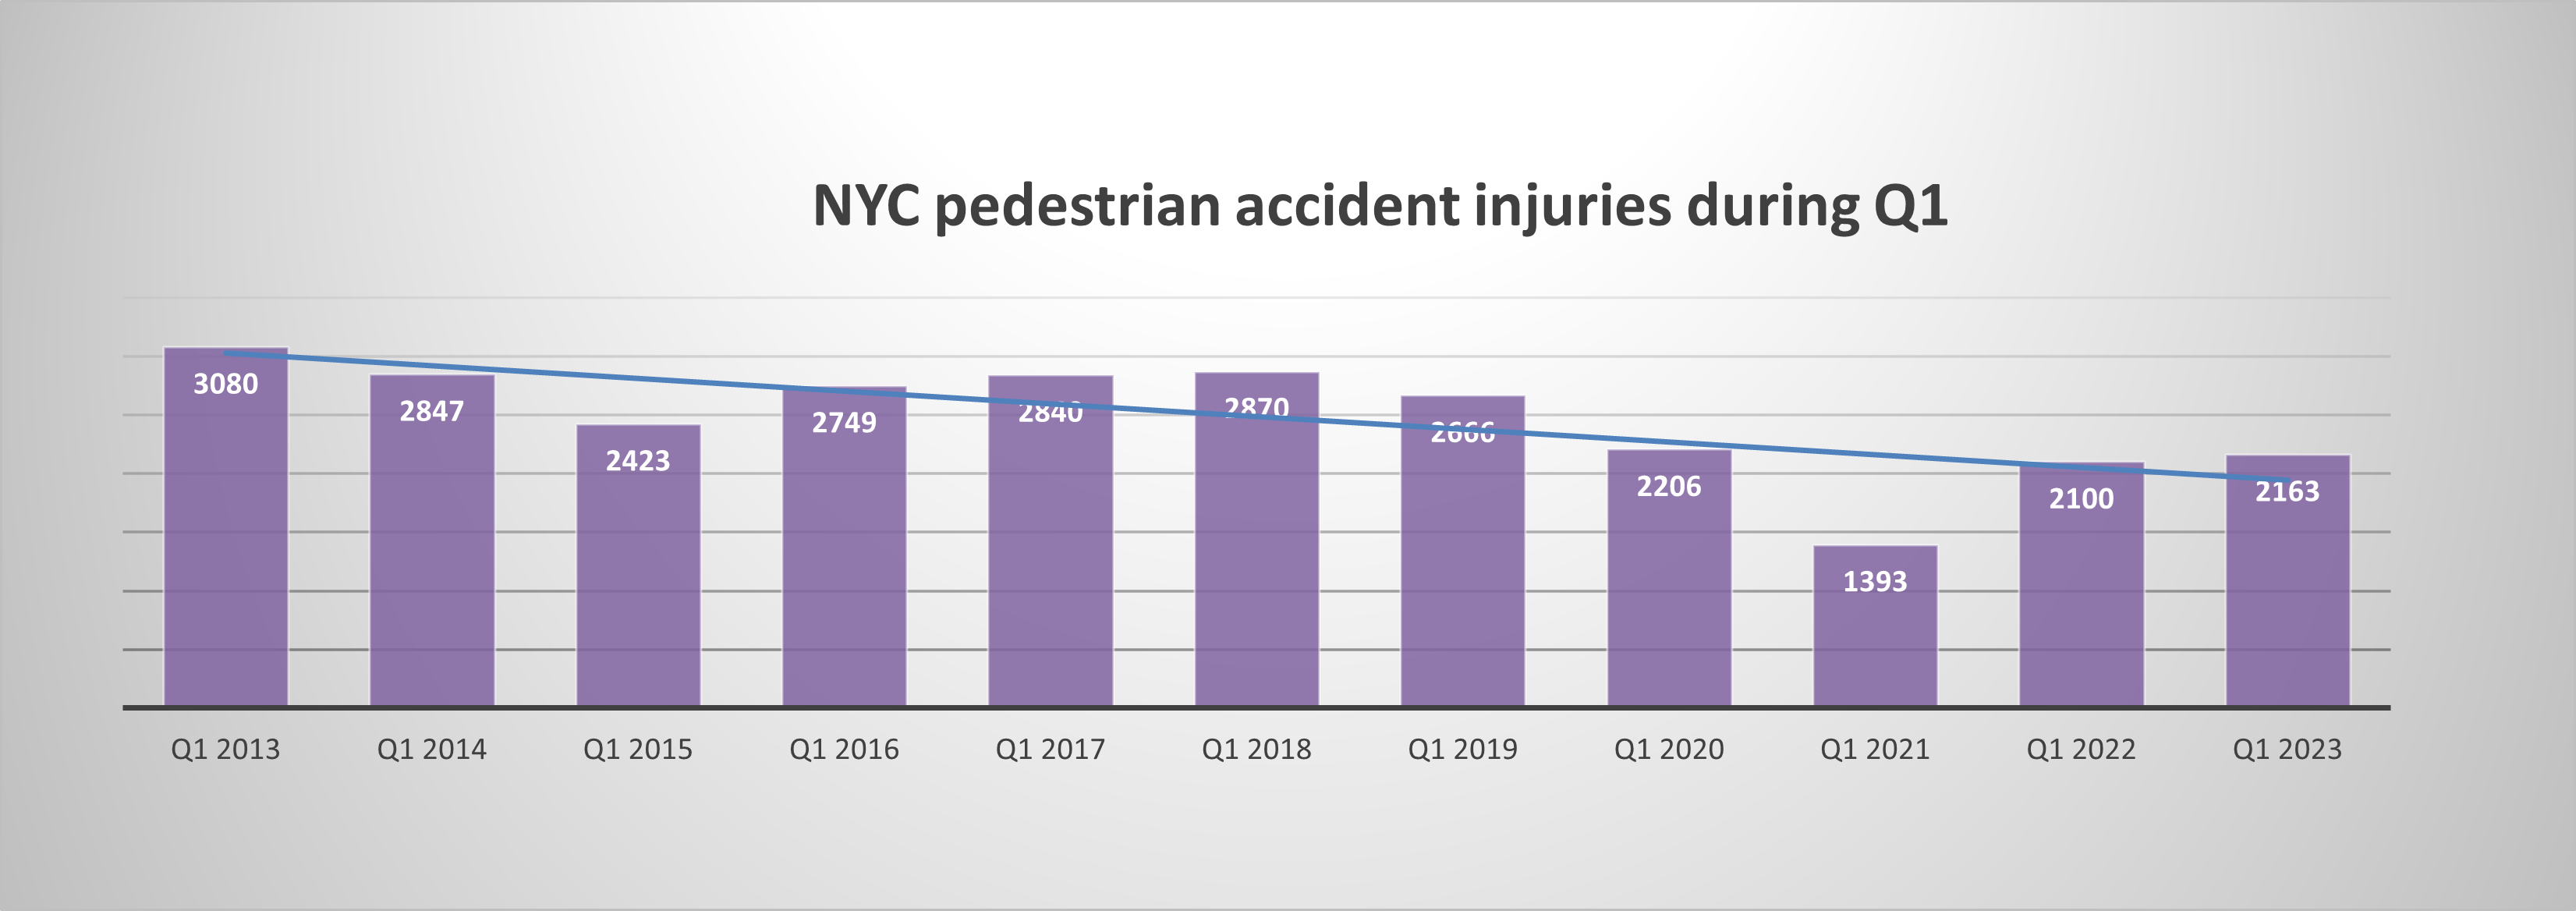 NYC pedestrian injuries for Q1 2023